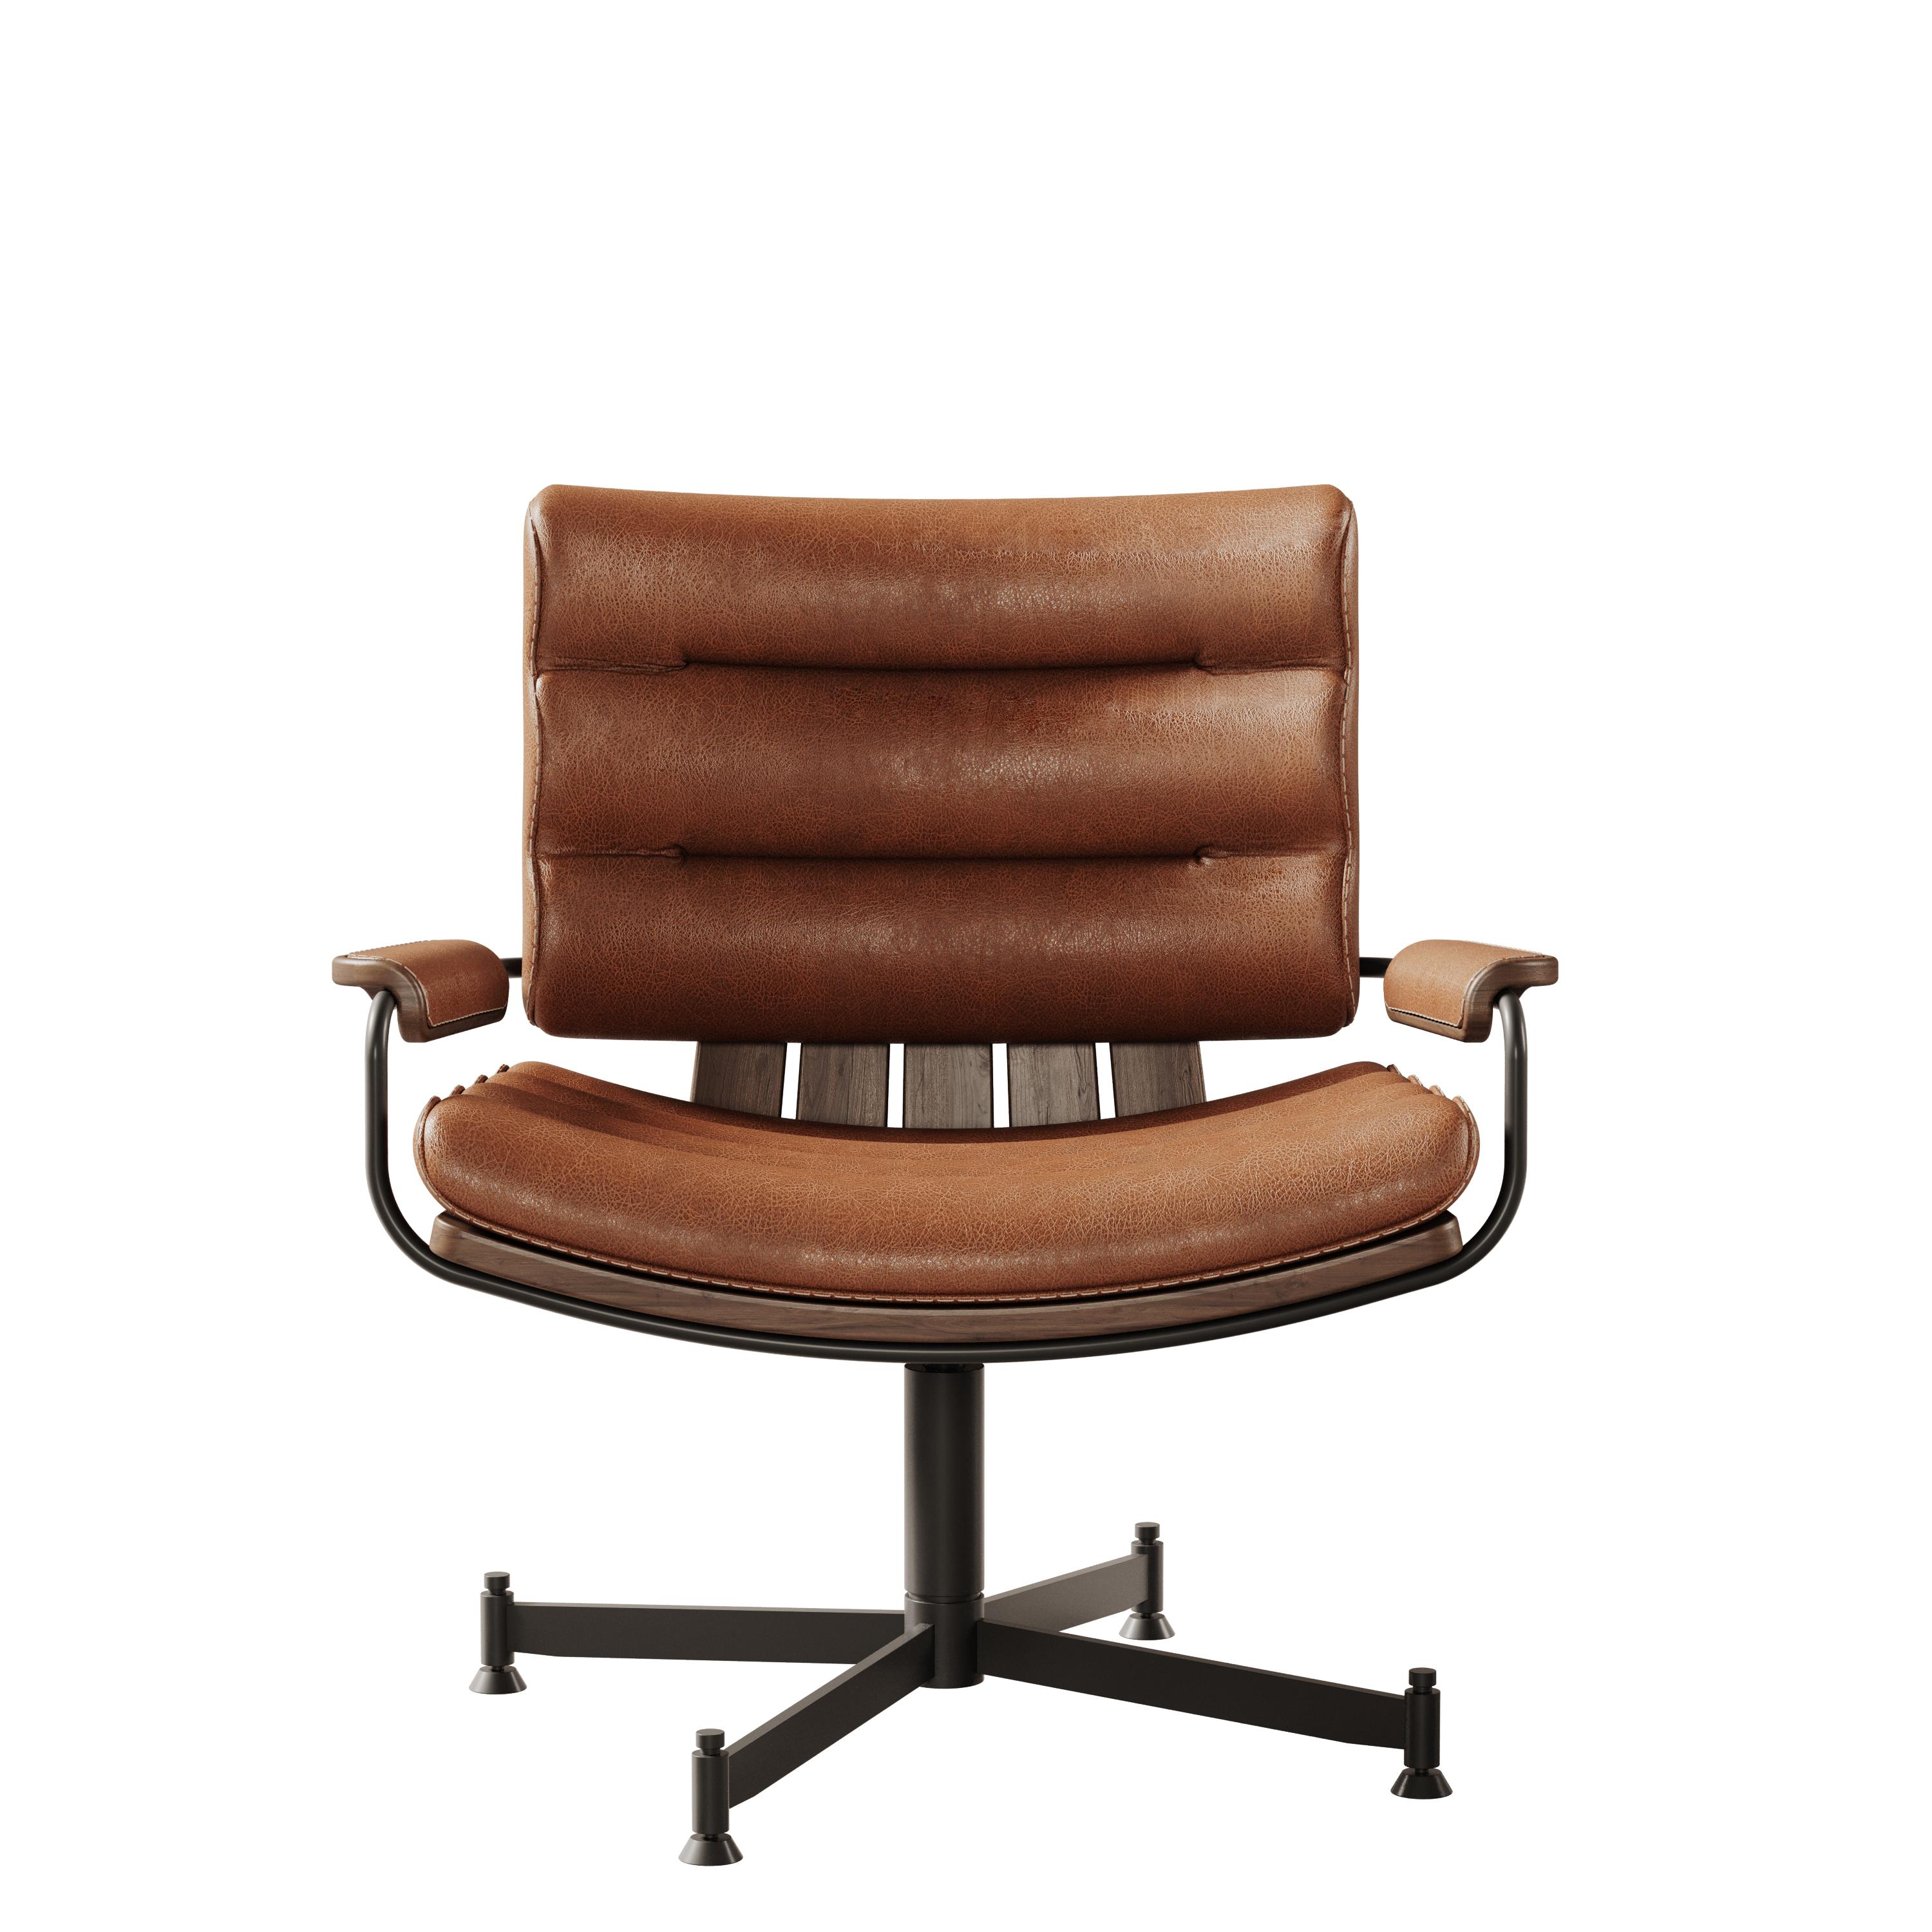 Designed for meaningful meetings and crucial decisions making, the Thomas office chair tributes Thomas Brassey. Brassey was a prestigious member of the privileged Brooks' Gentlemen Club, he was also a British Liberal politician and Governor of